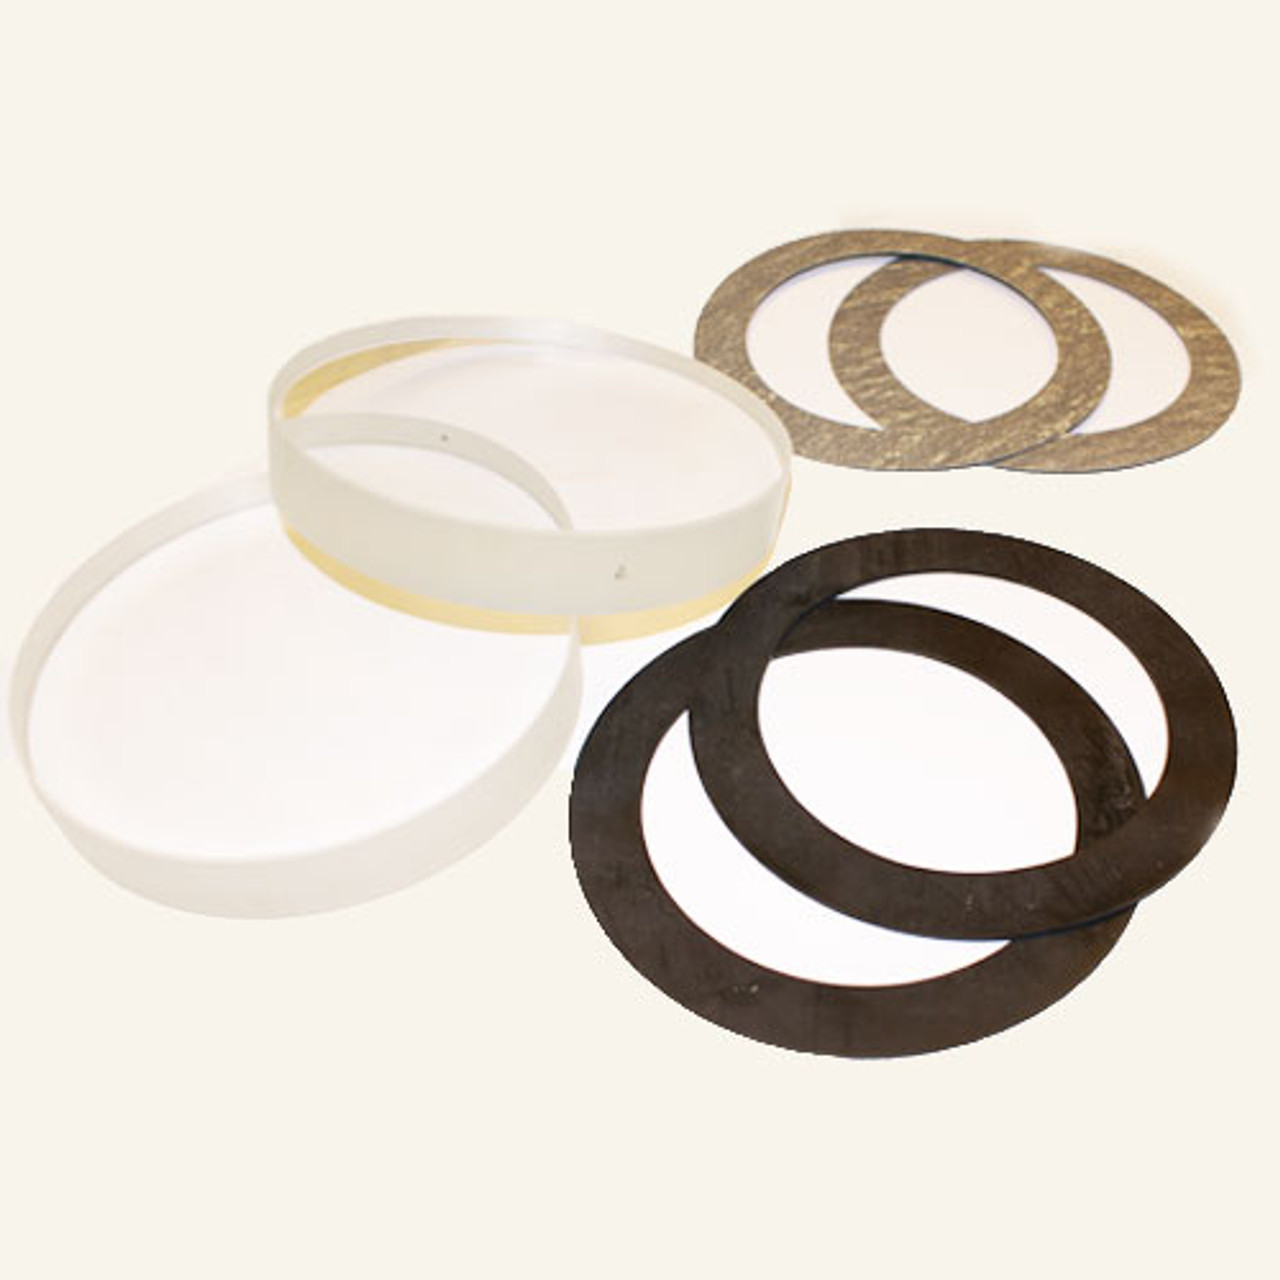 Replacement Glass & Gaskets for 1/2" & 3/4" with Neoprene Seals-TXX 15 N